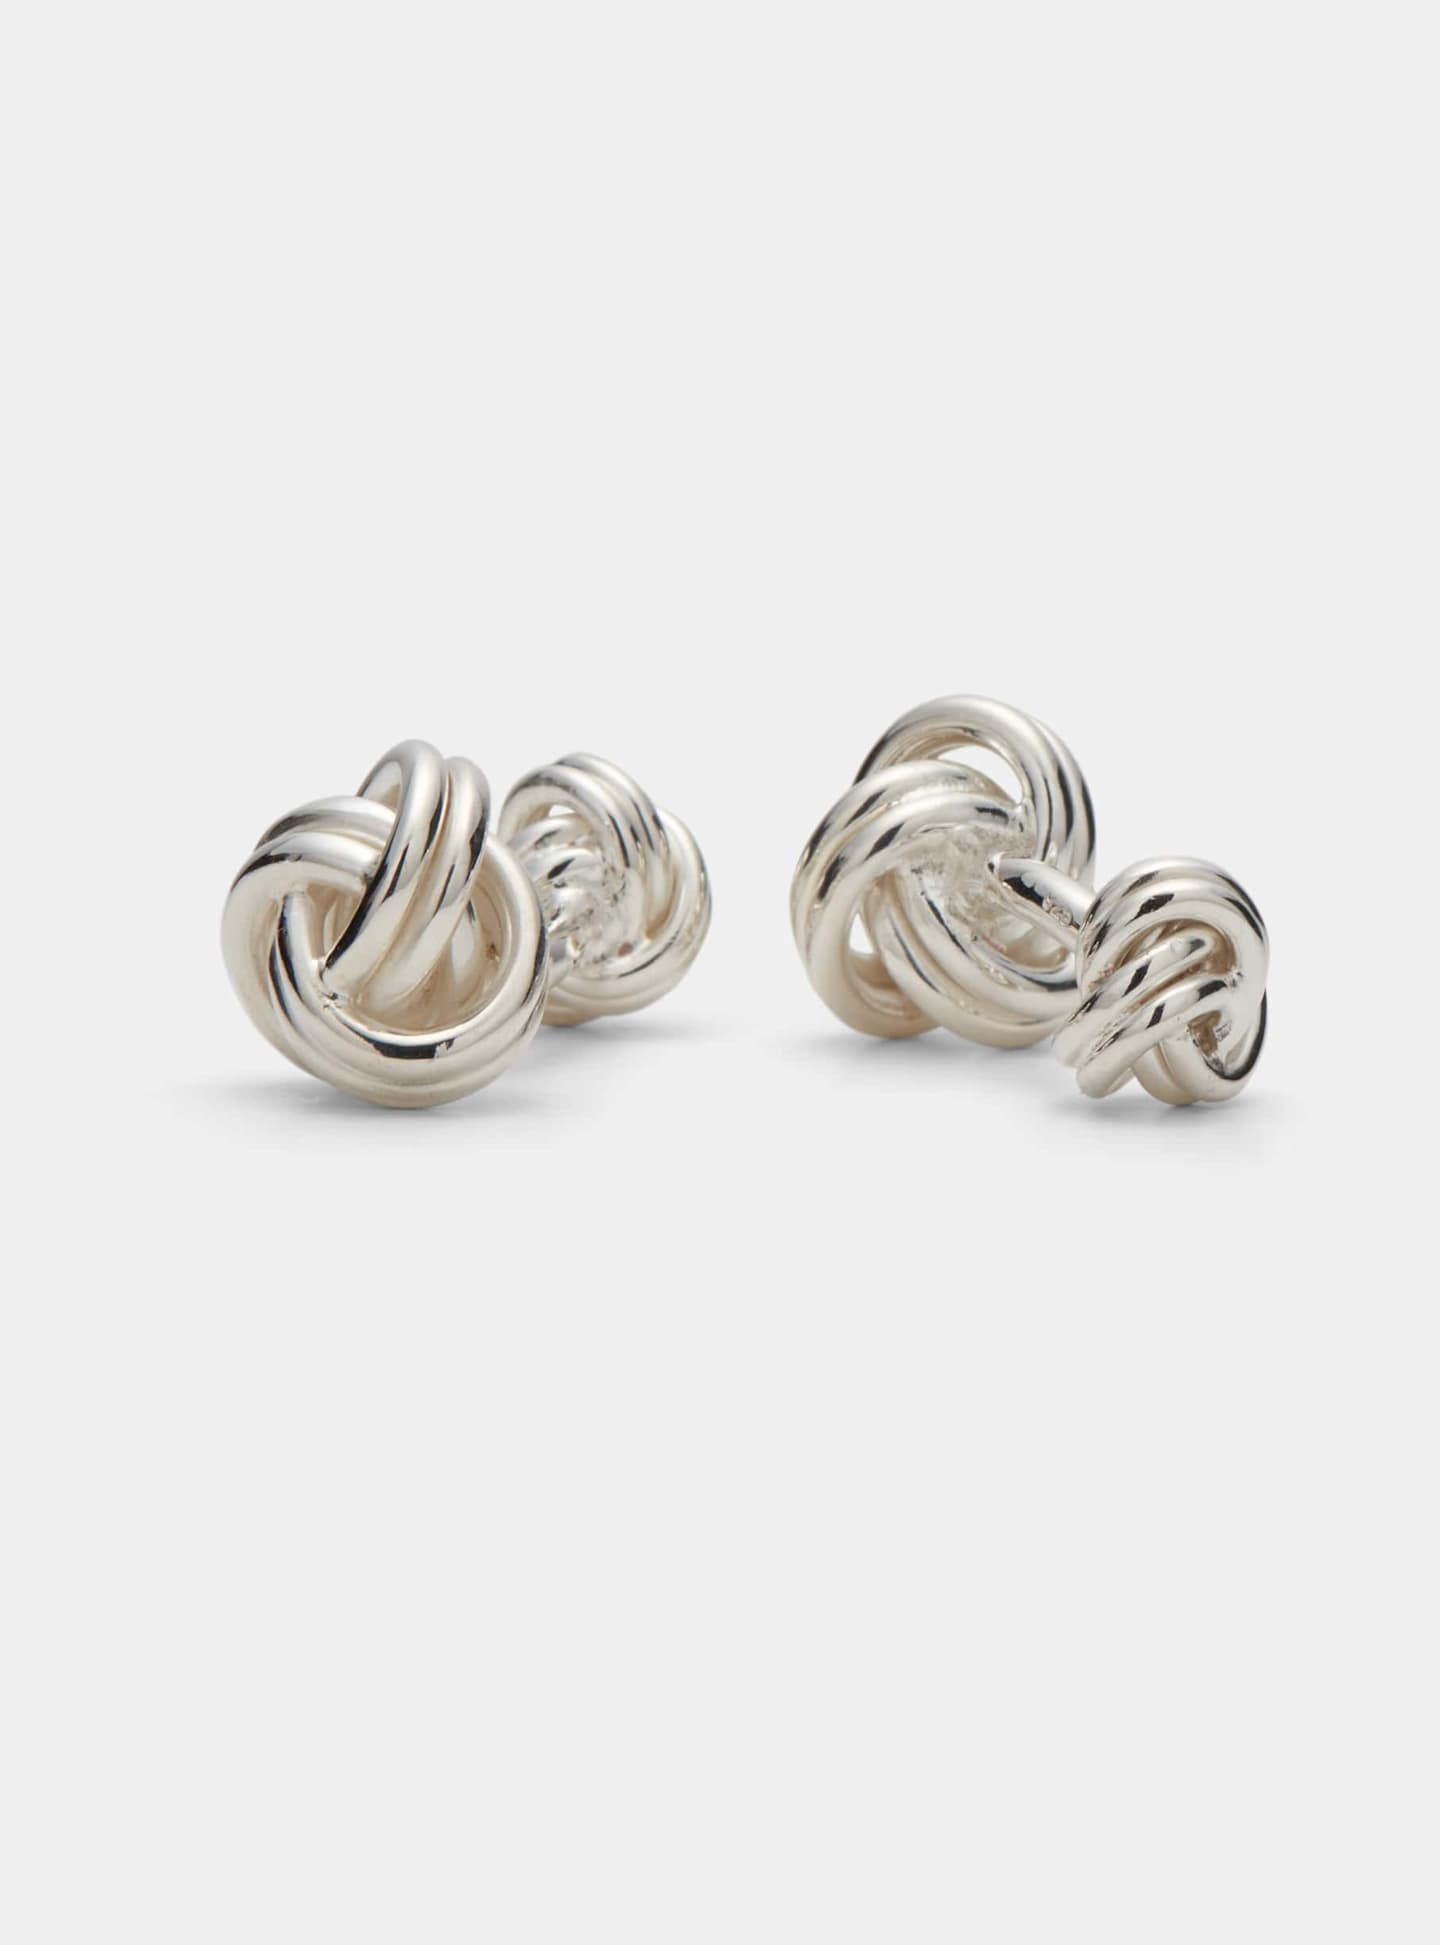 Knotted sterling silver cufflinks